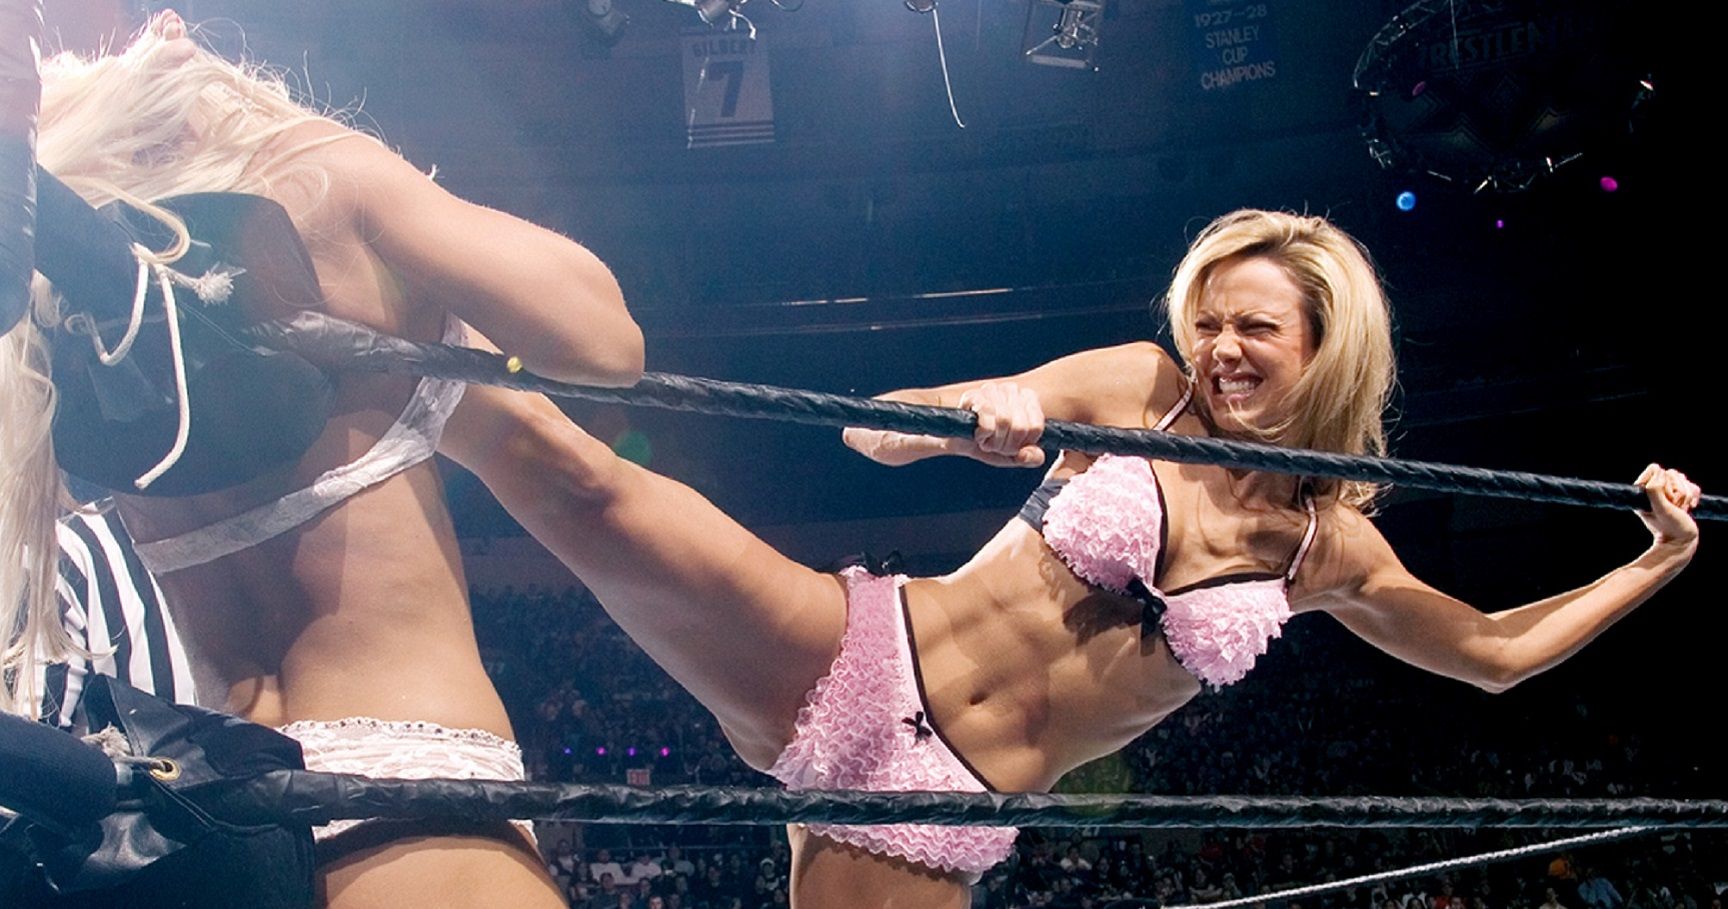 david gerdes recommends women wrestling in thongs pic